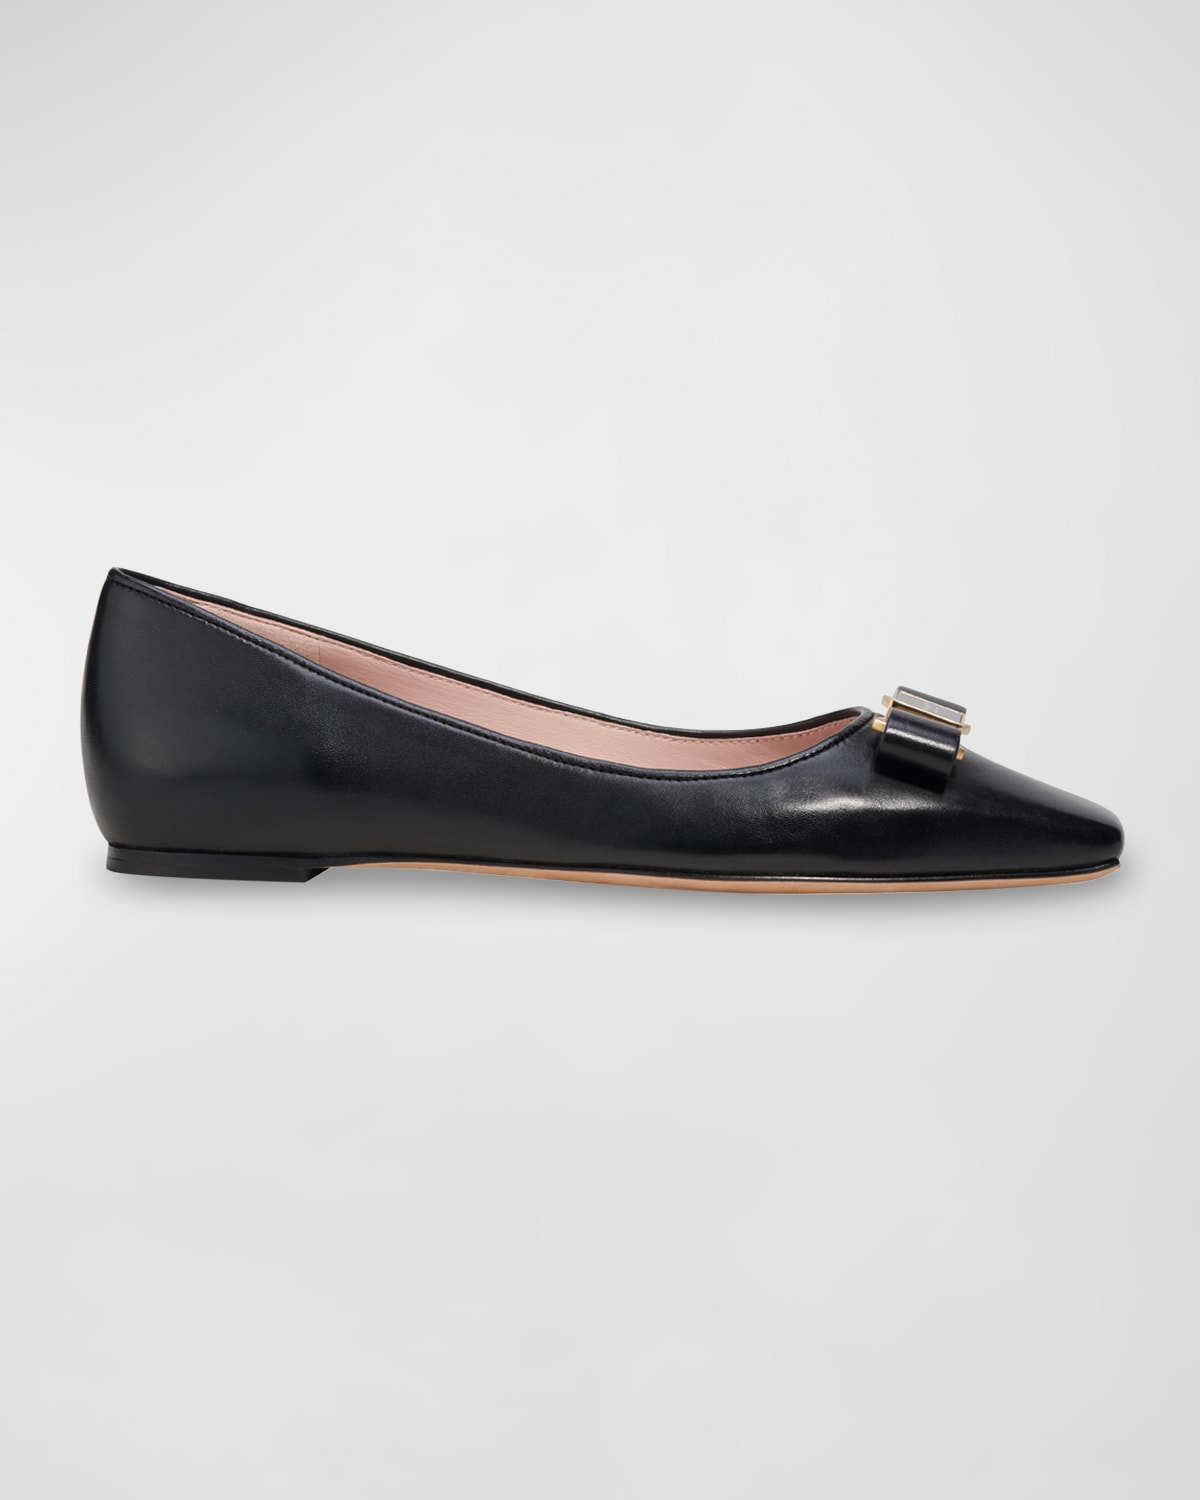 KATE SPADE BOWDIE LEATHER BALLERINA FLATS